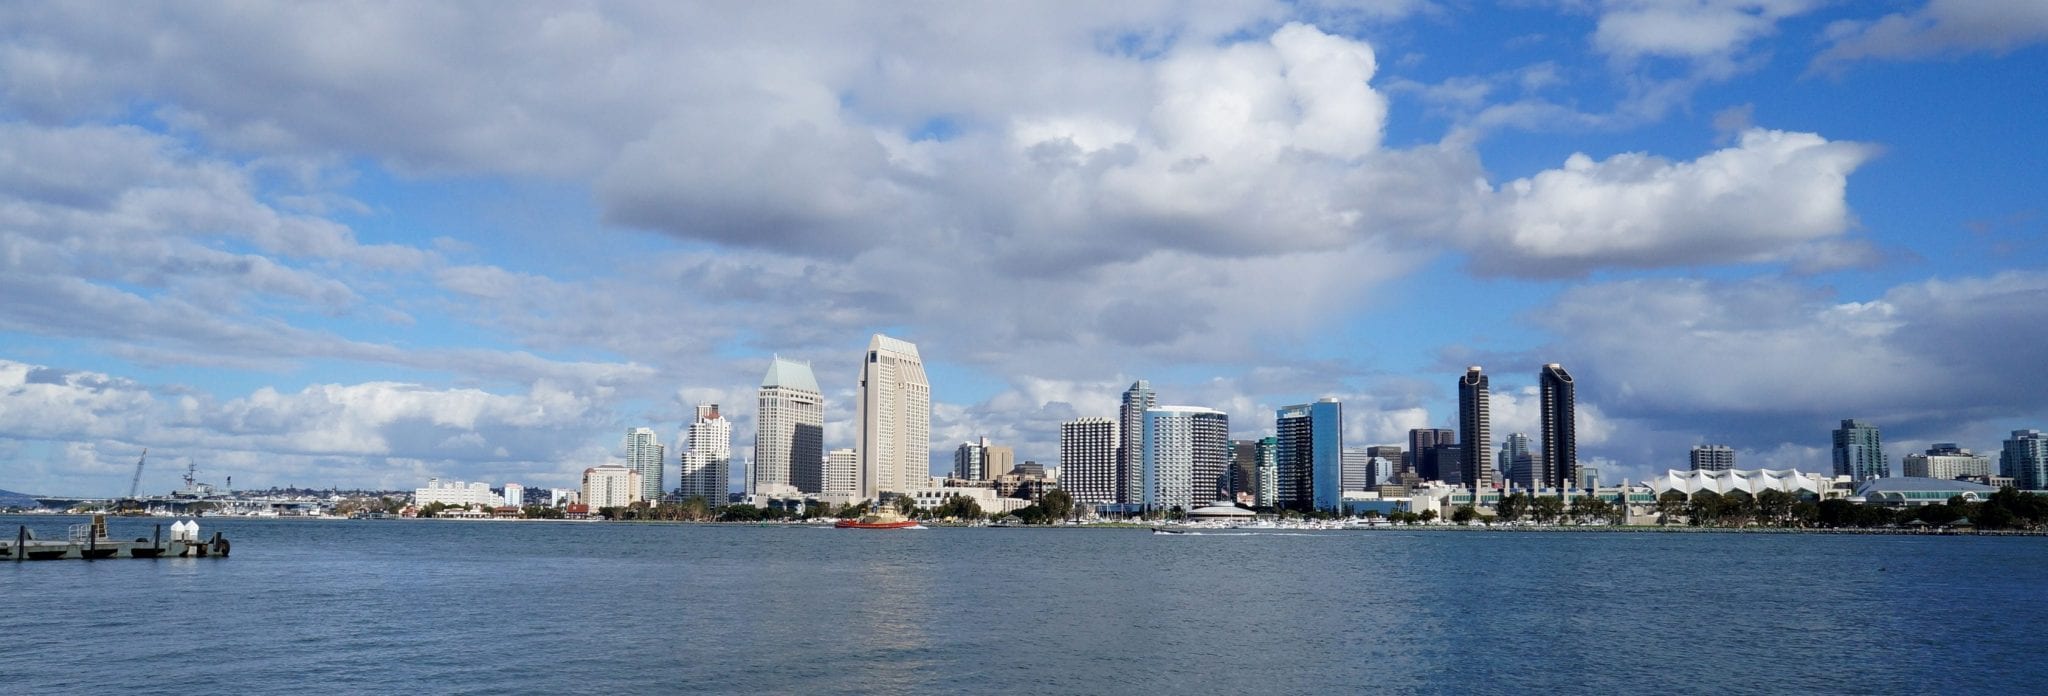 San Diego skyline from the waterfront.